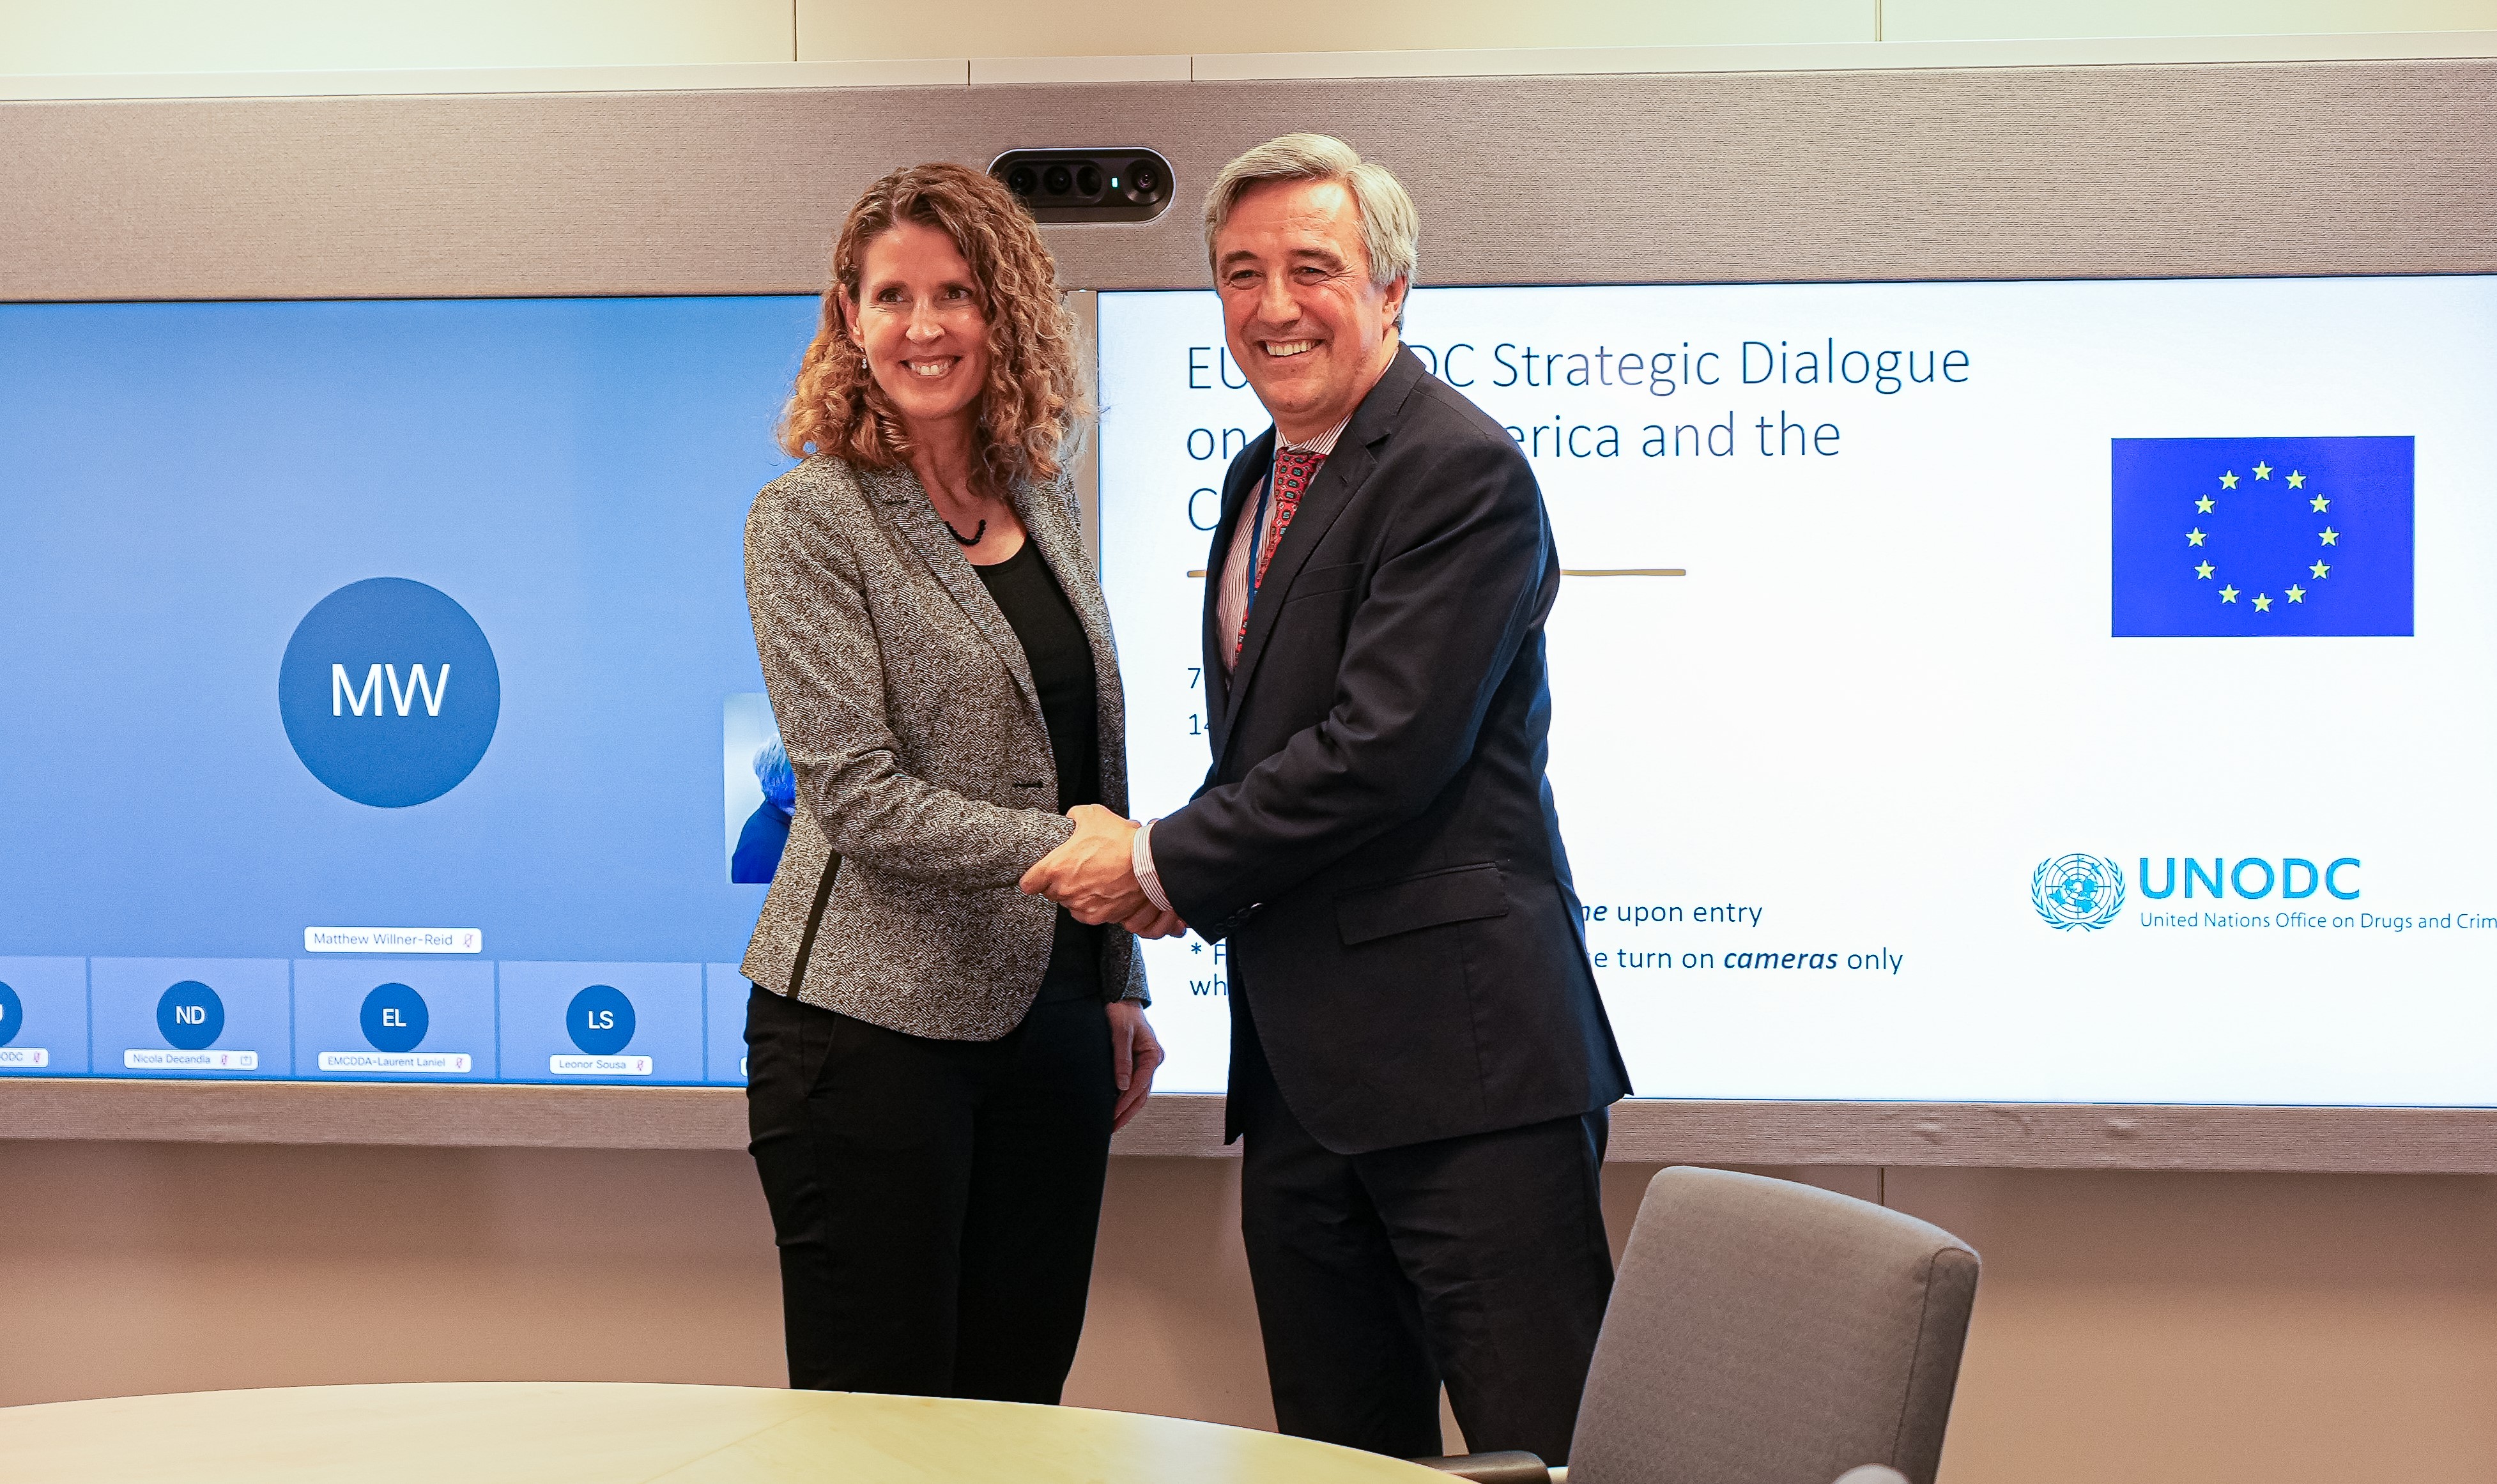 <em>Deputy Director of the Division for Operations of the United Nations Office on Drugs and Crime (UNODC) Candice Welsch and Deputy Managing Director for the Americas at the European External Action Service shake hands</em>